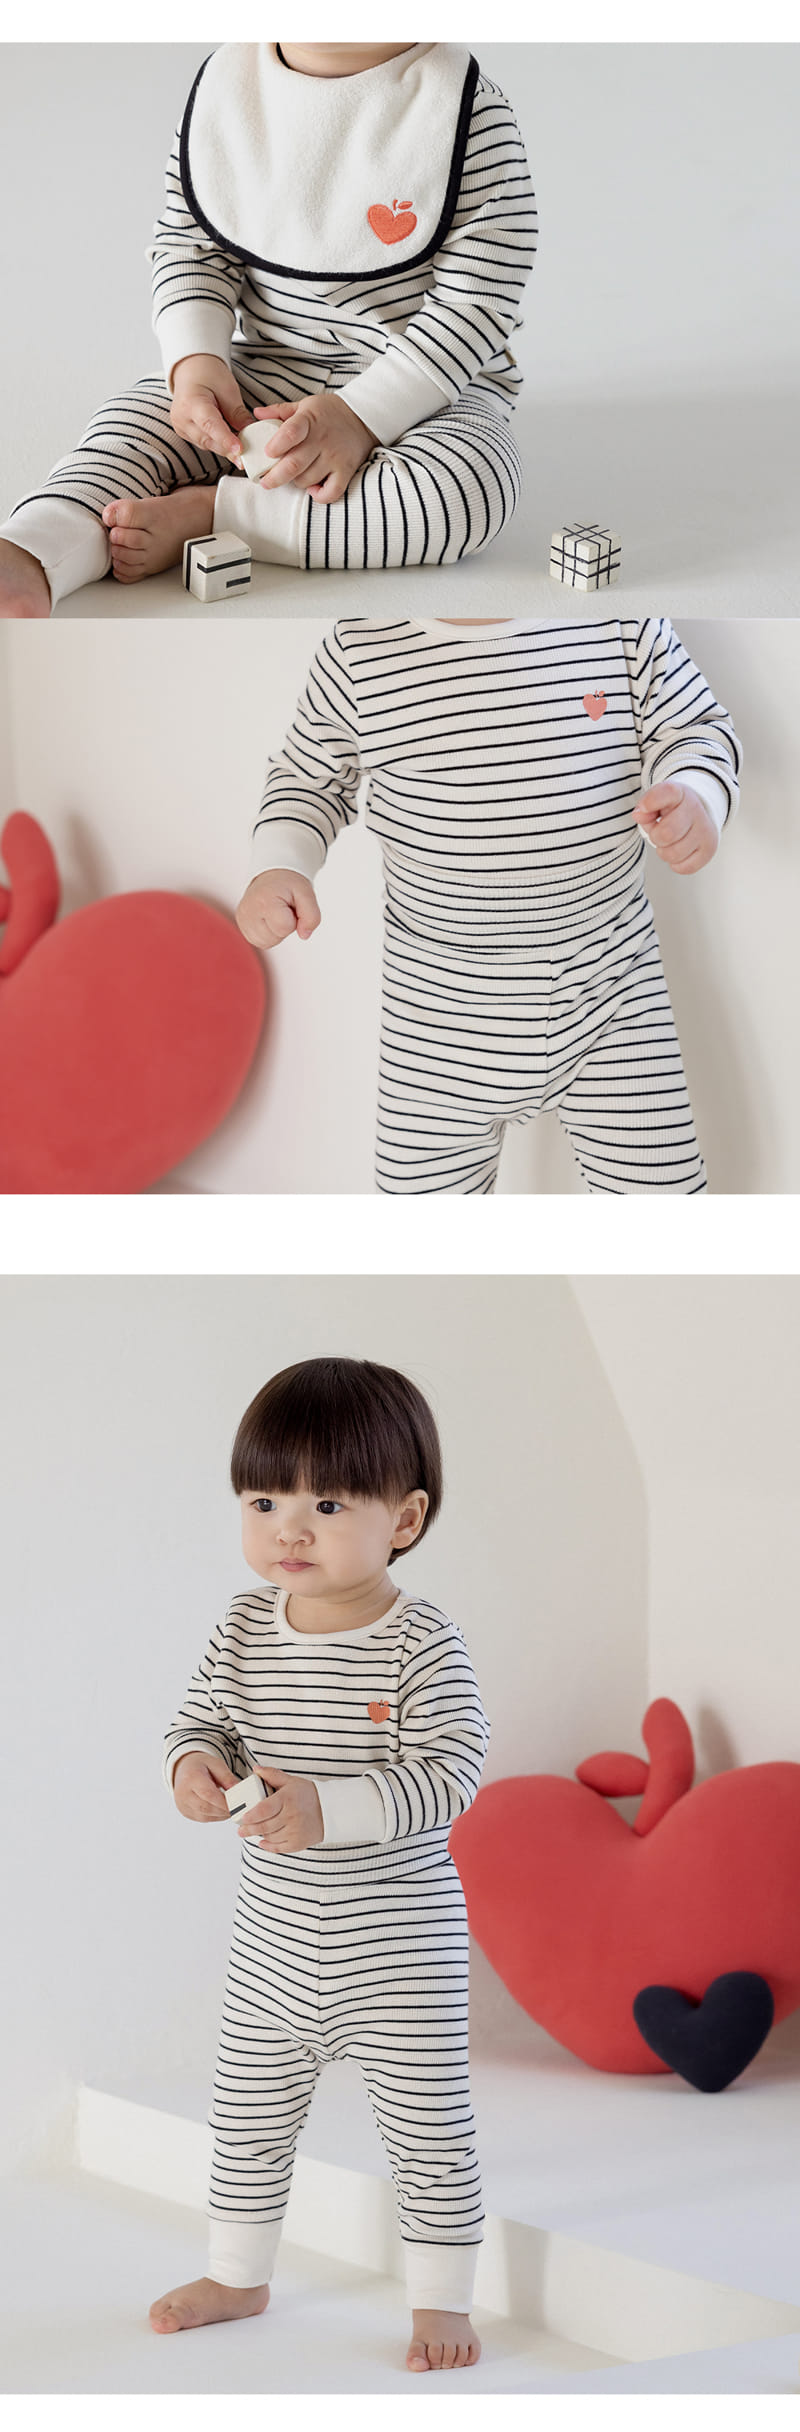 Kids Clara - Korean Baby Fashion - #smilingbaby - Ylang Compy Belly Baby Easy Wear - 3